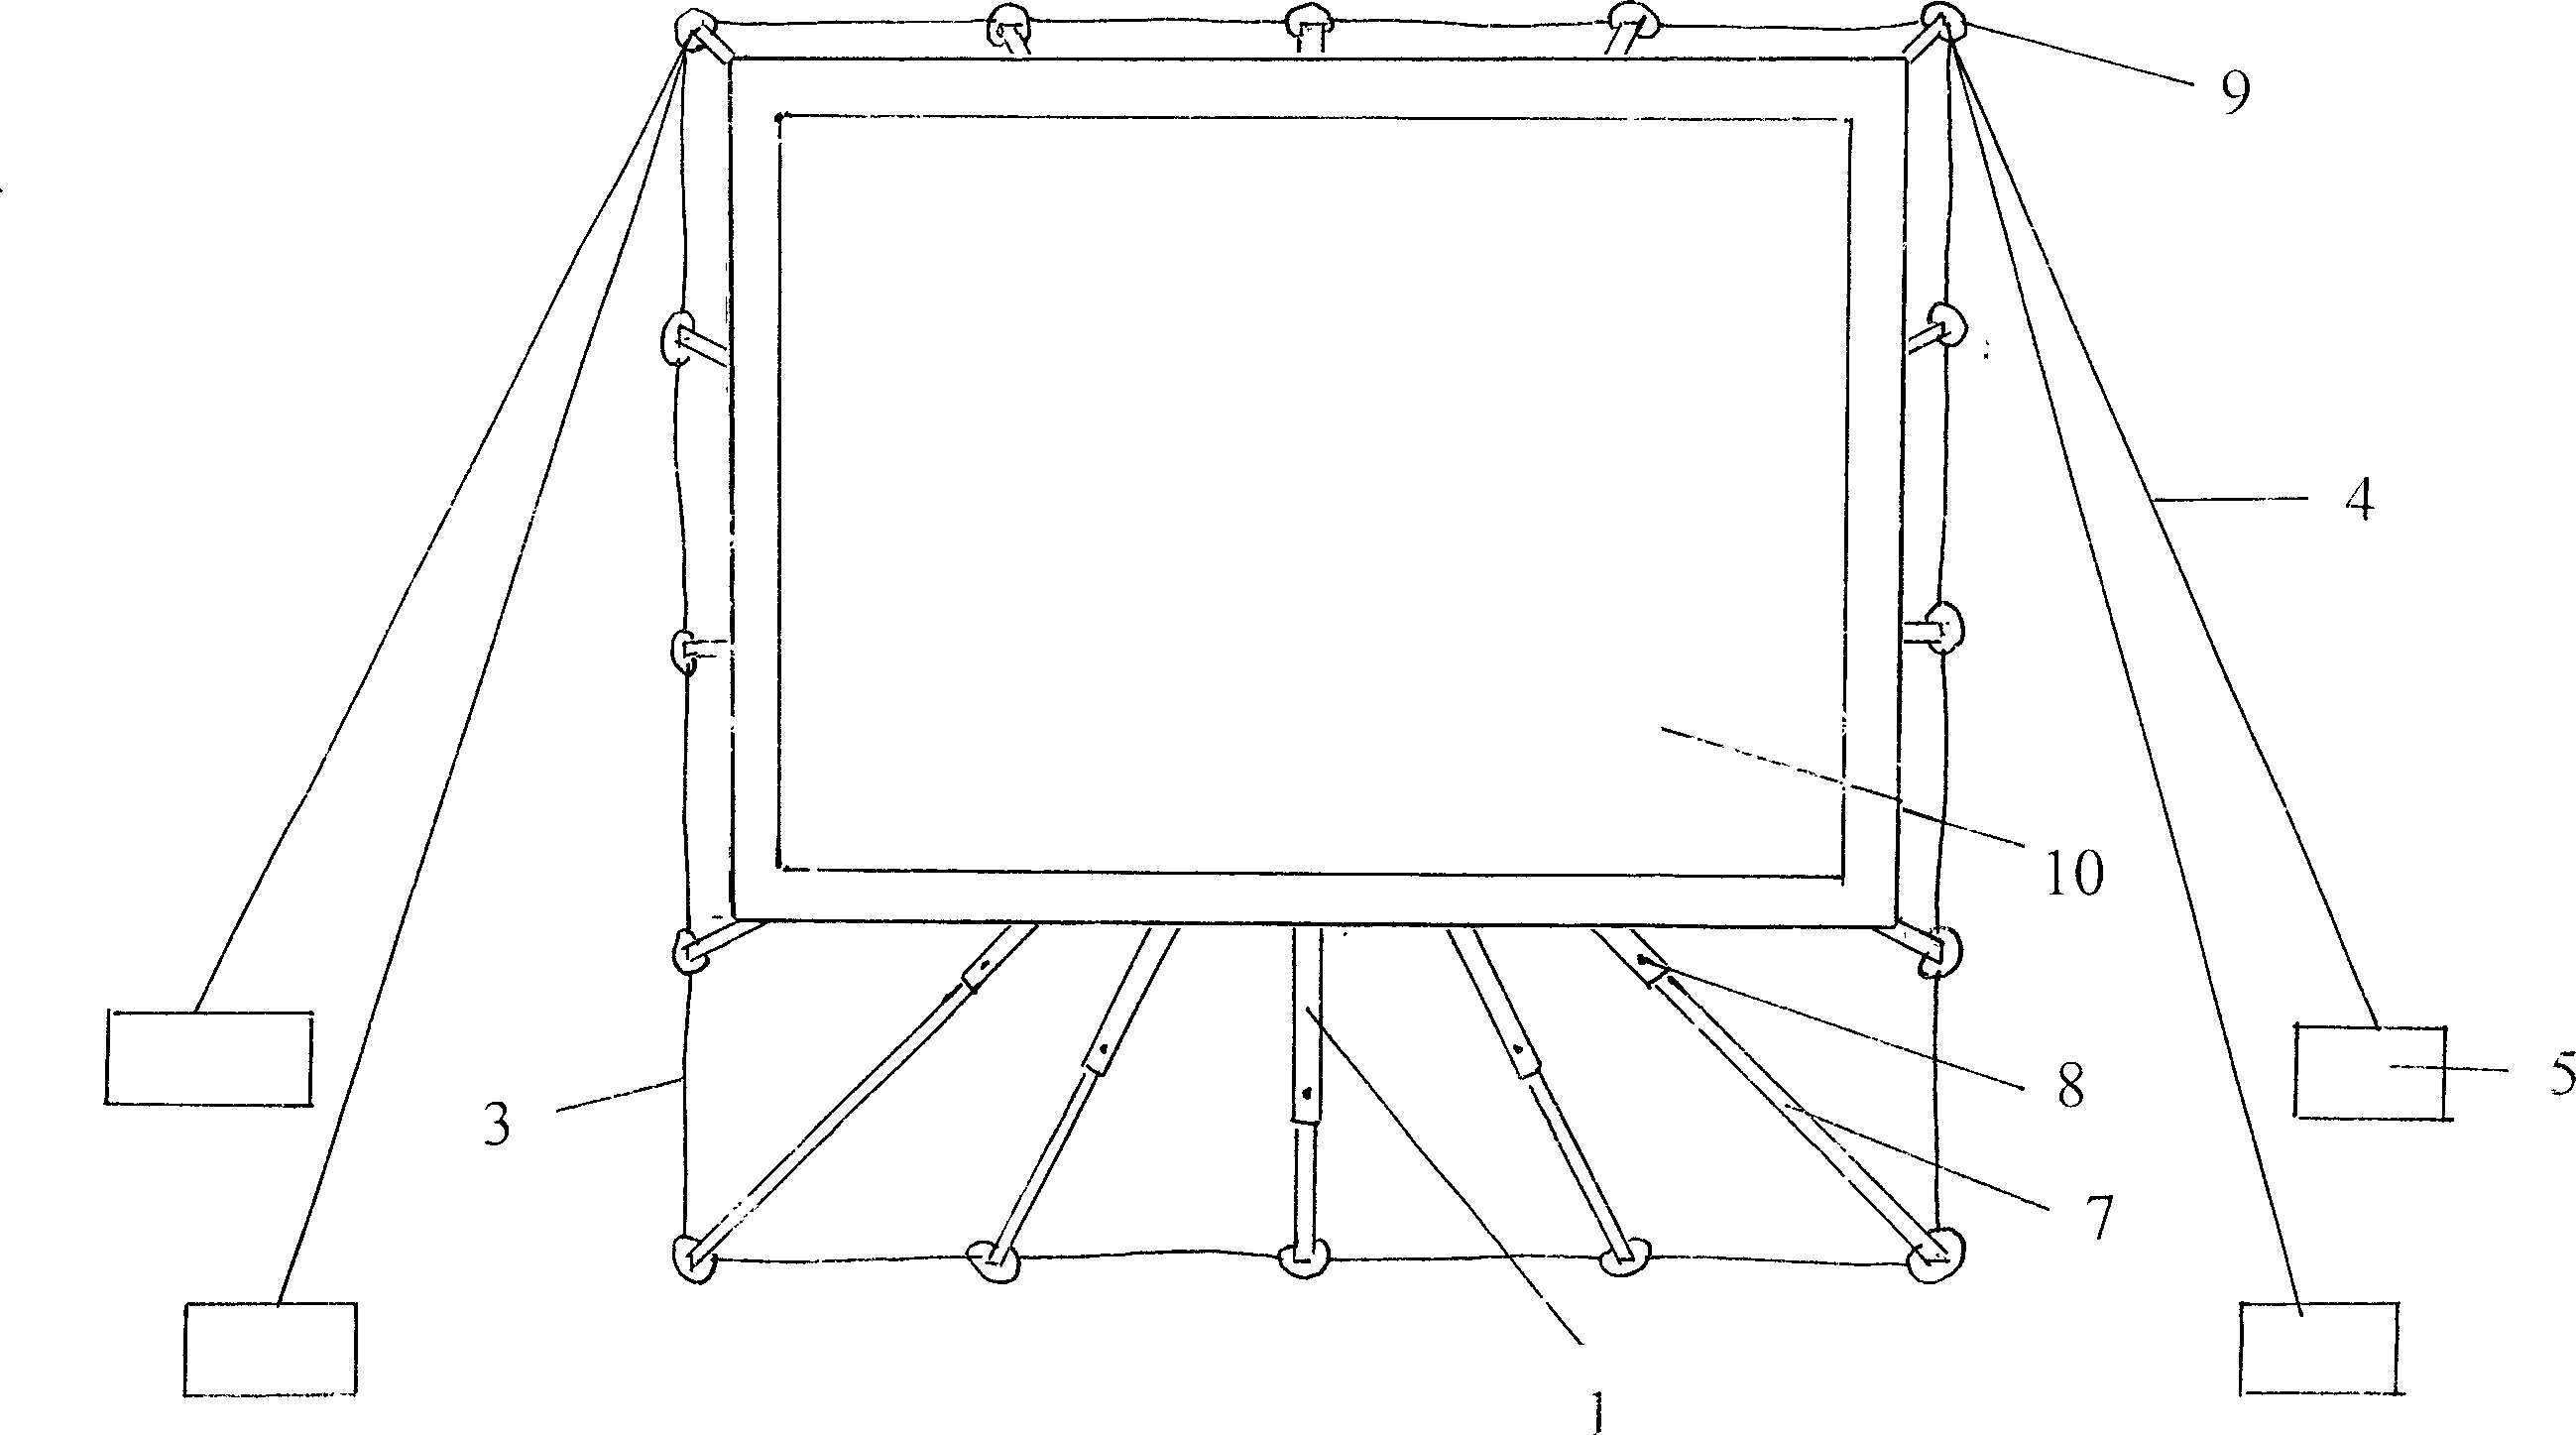 A projection screen rack for mobile projection